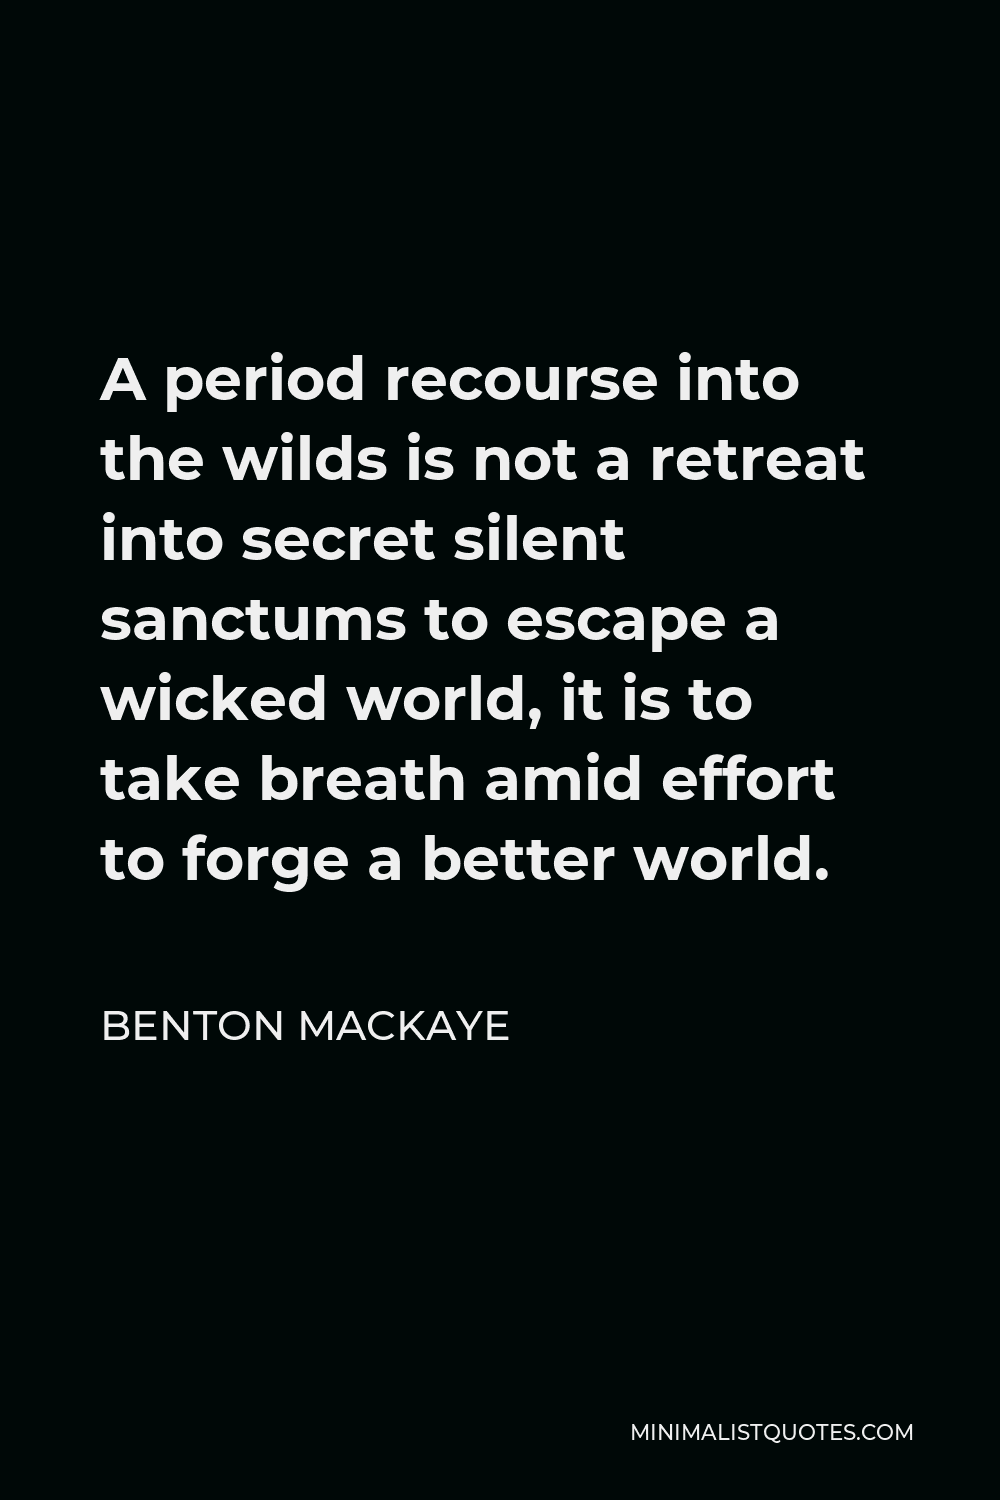 Benton MacKaye Quote - A period recourse into the wilds is not a retreat into secret silent sanctums to escape a wicked world, it is to take breath amid effort to forge a better world.